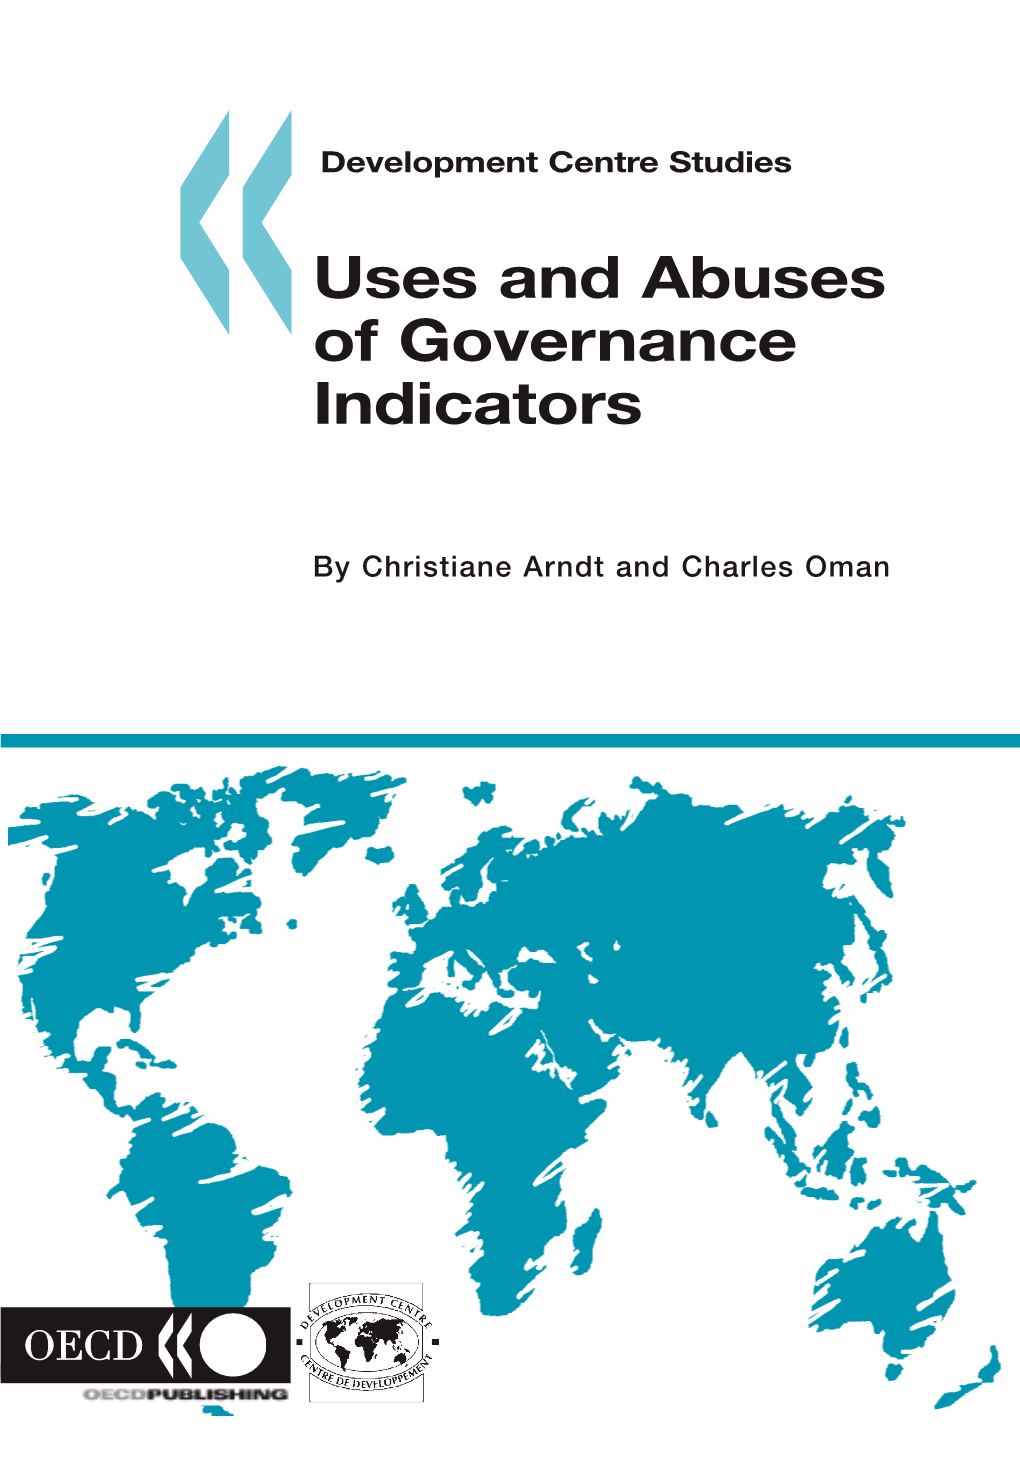 Development Centre Studies : Uses and Abuses of Governance Indicators